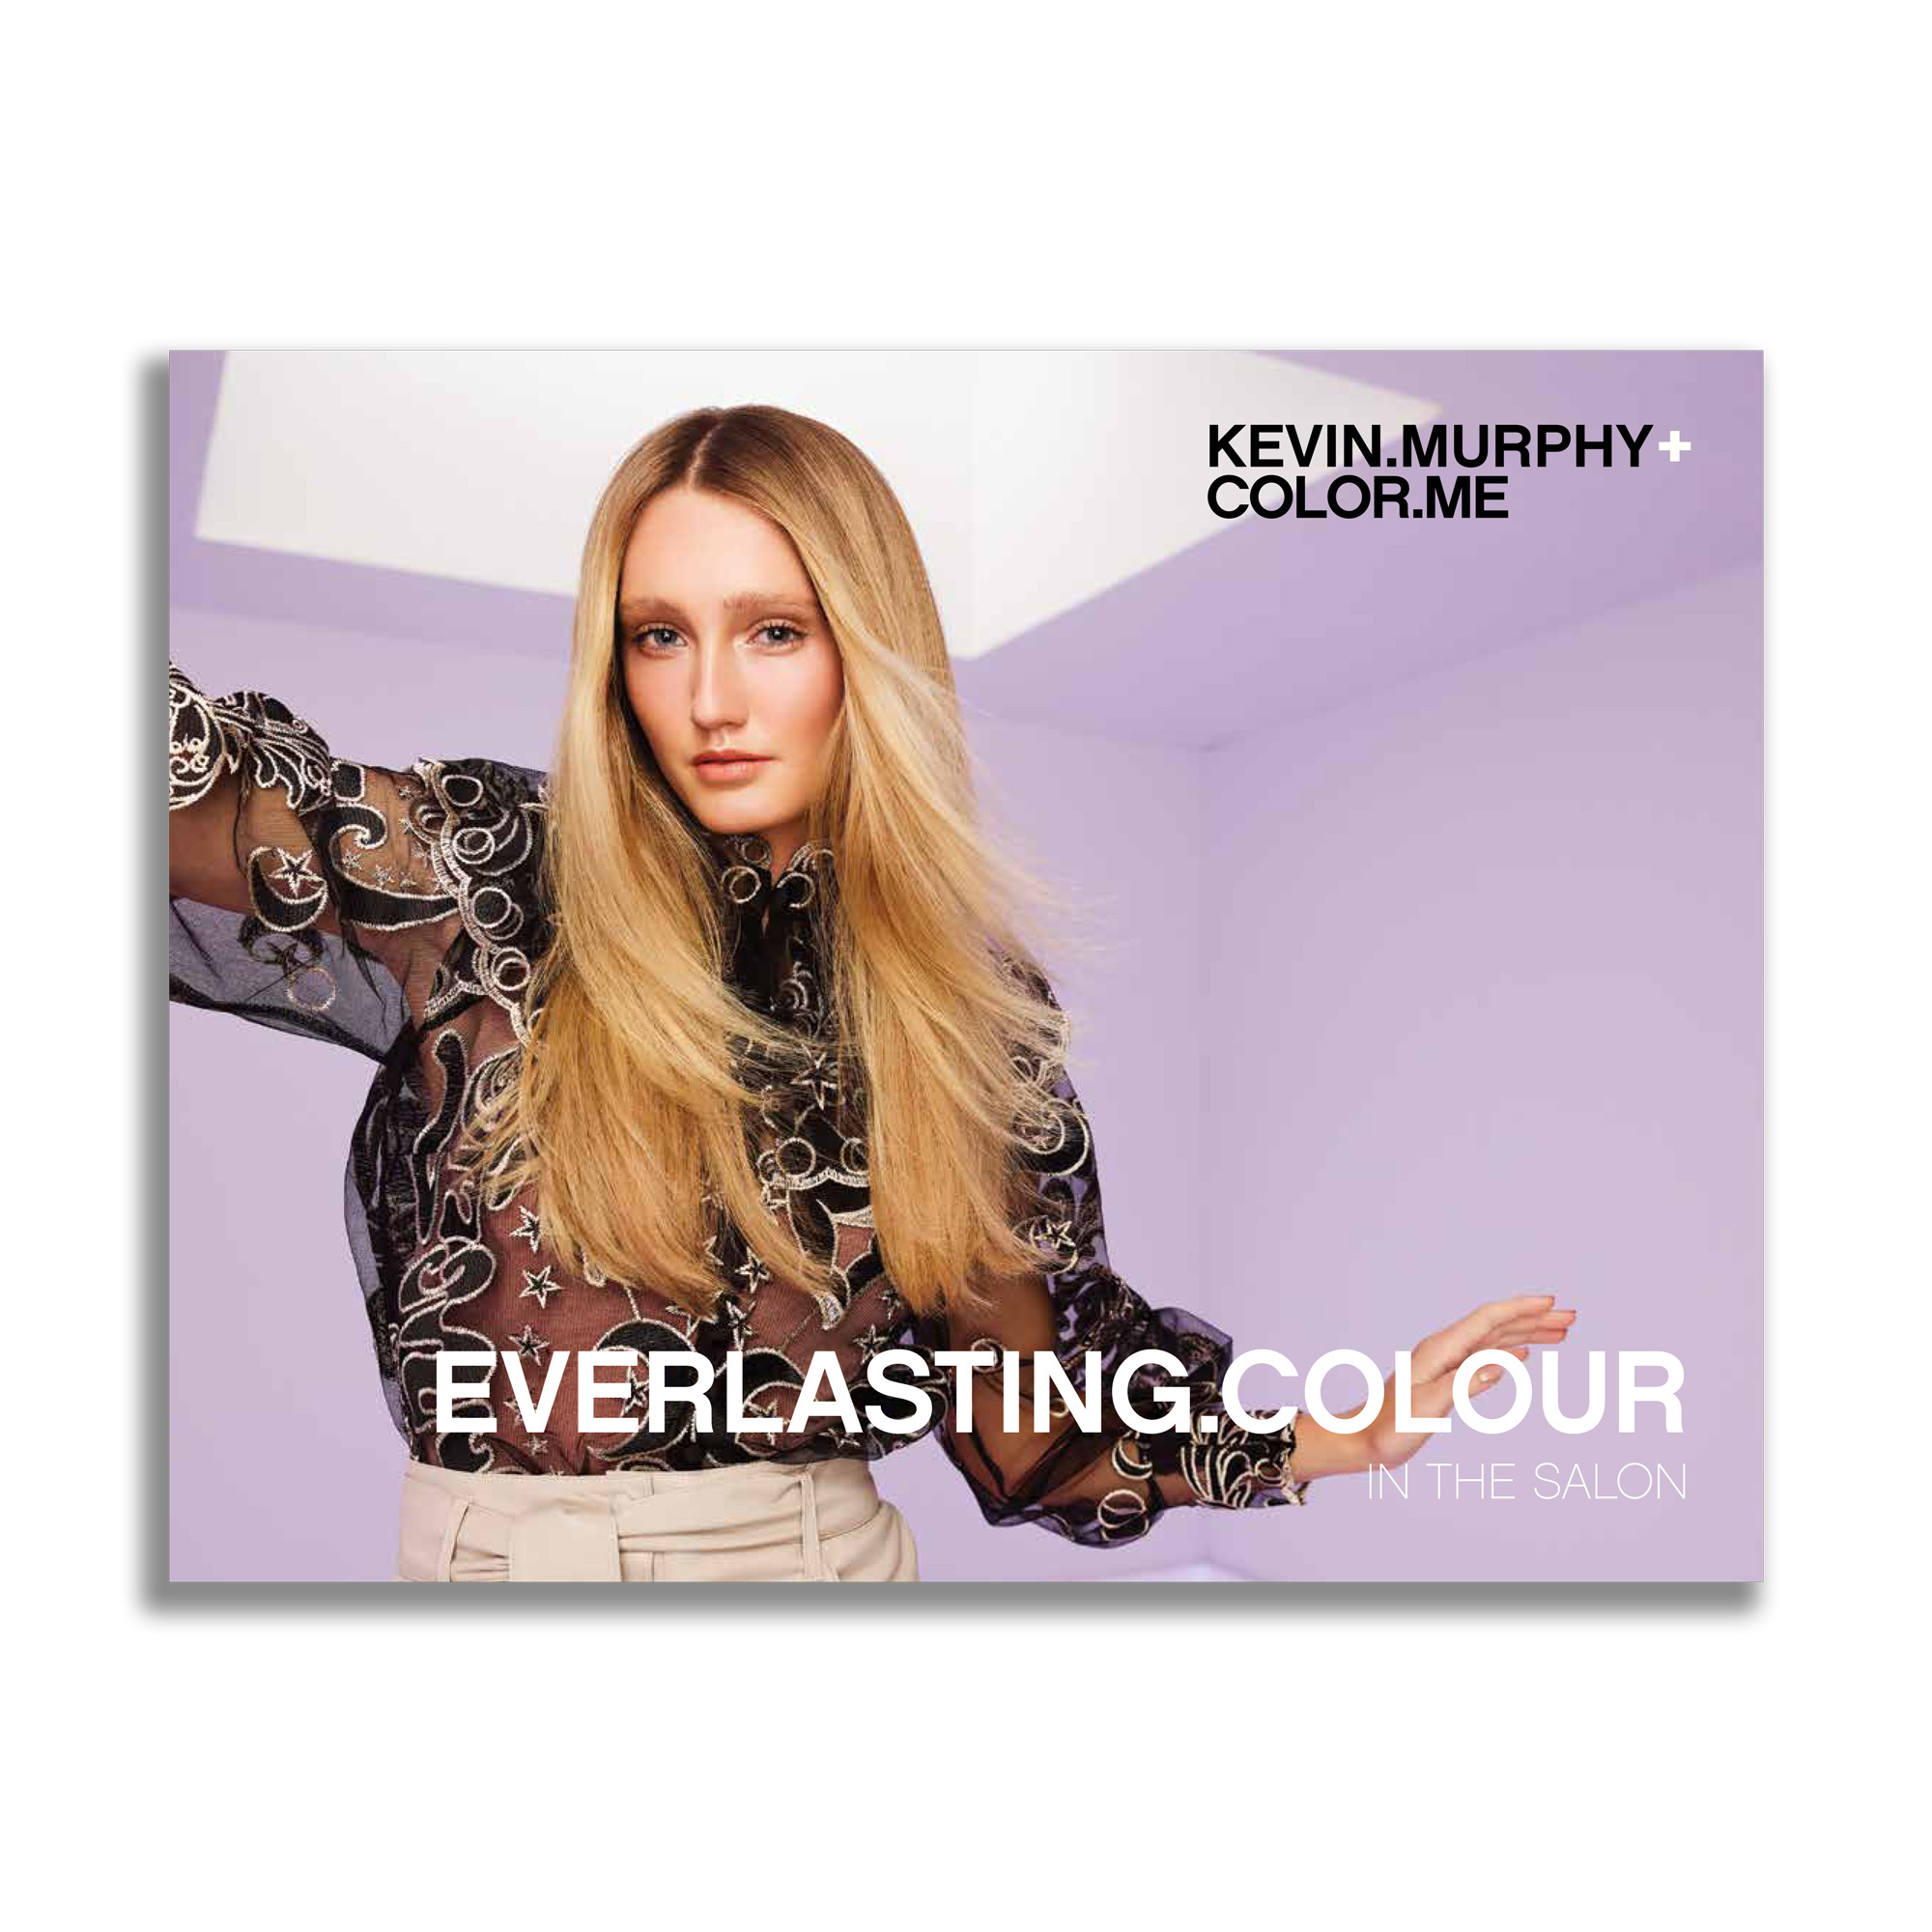 KEVIN.MURPHY EVERLASTING.COLOUR Look Book